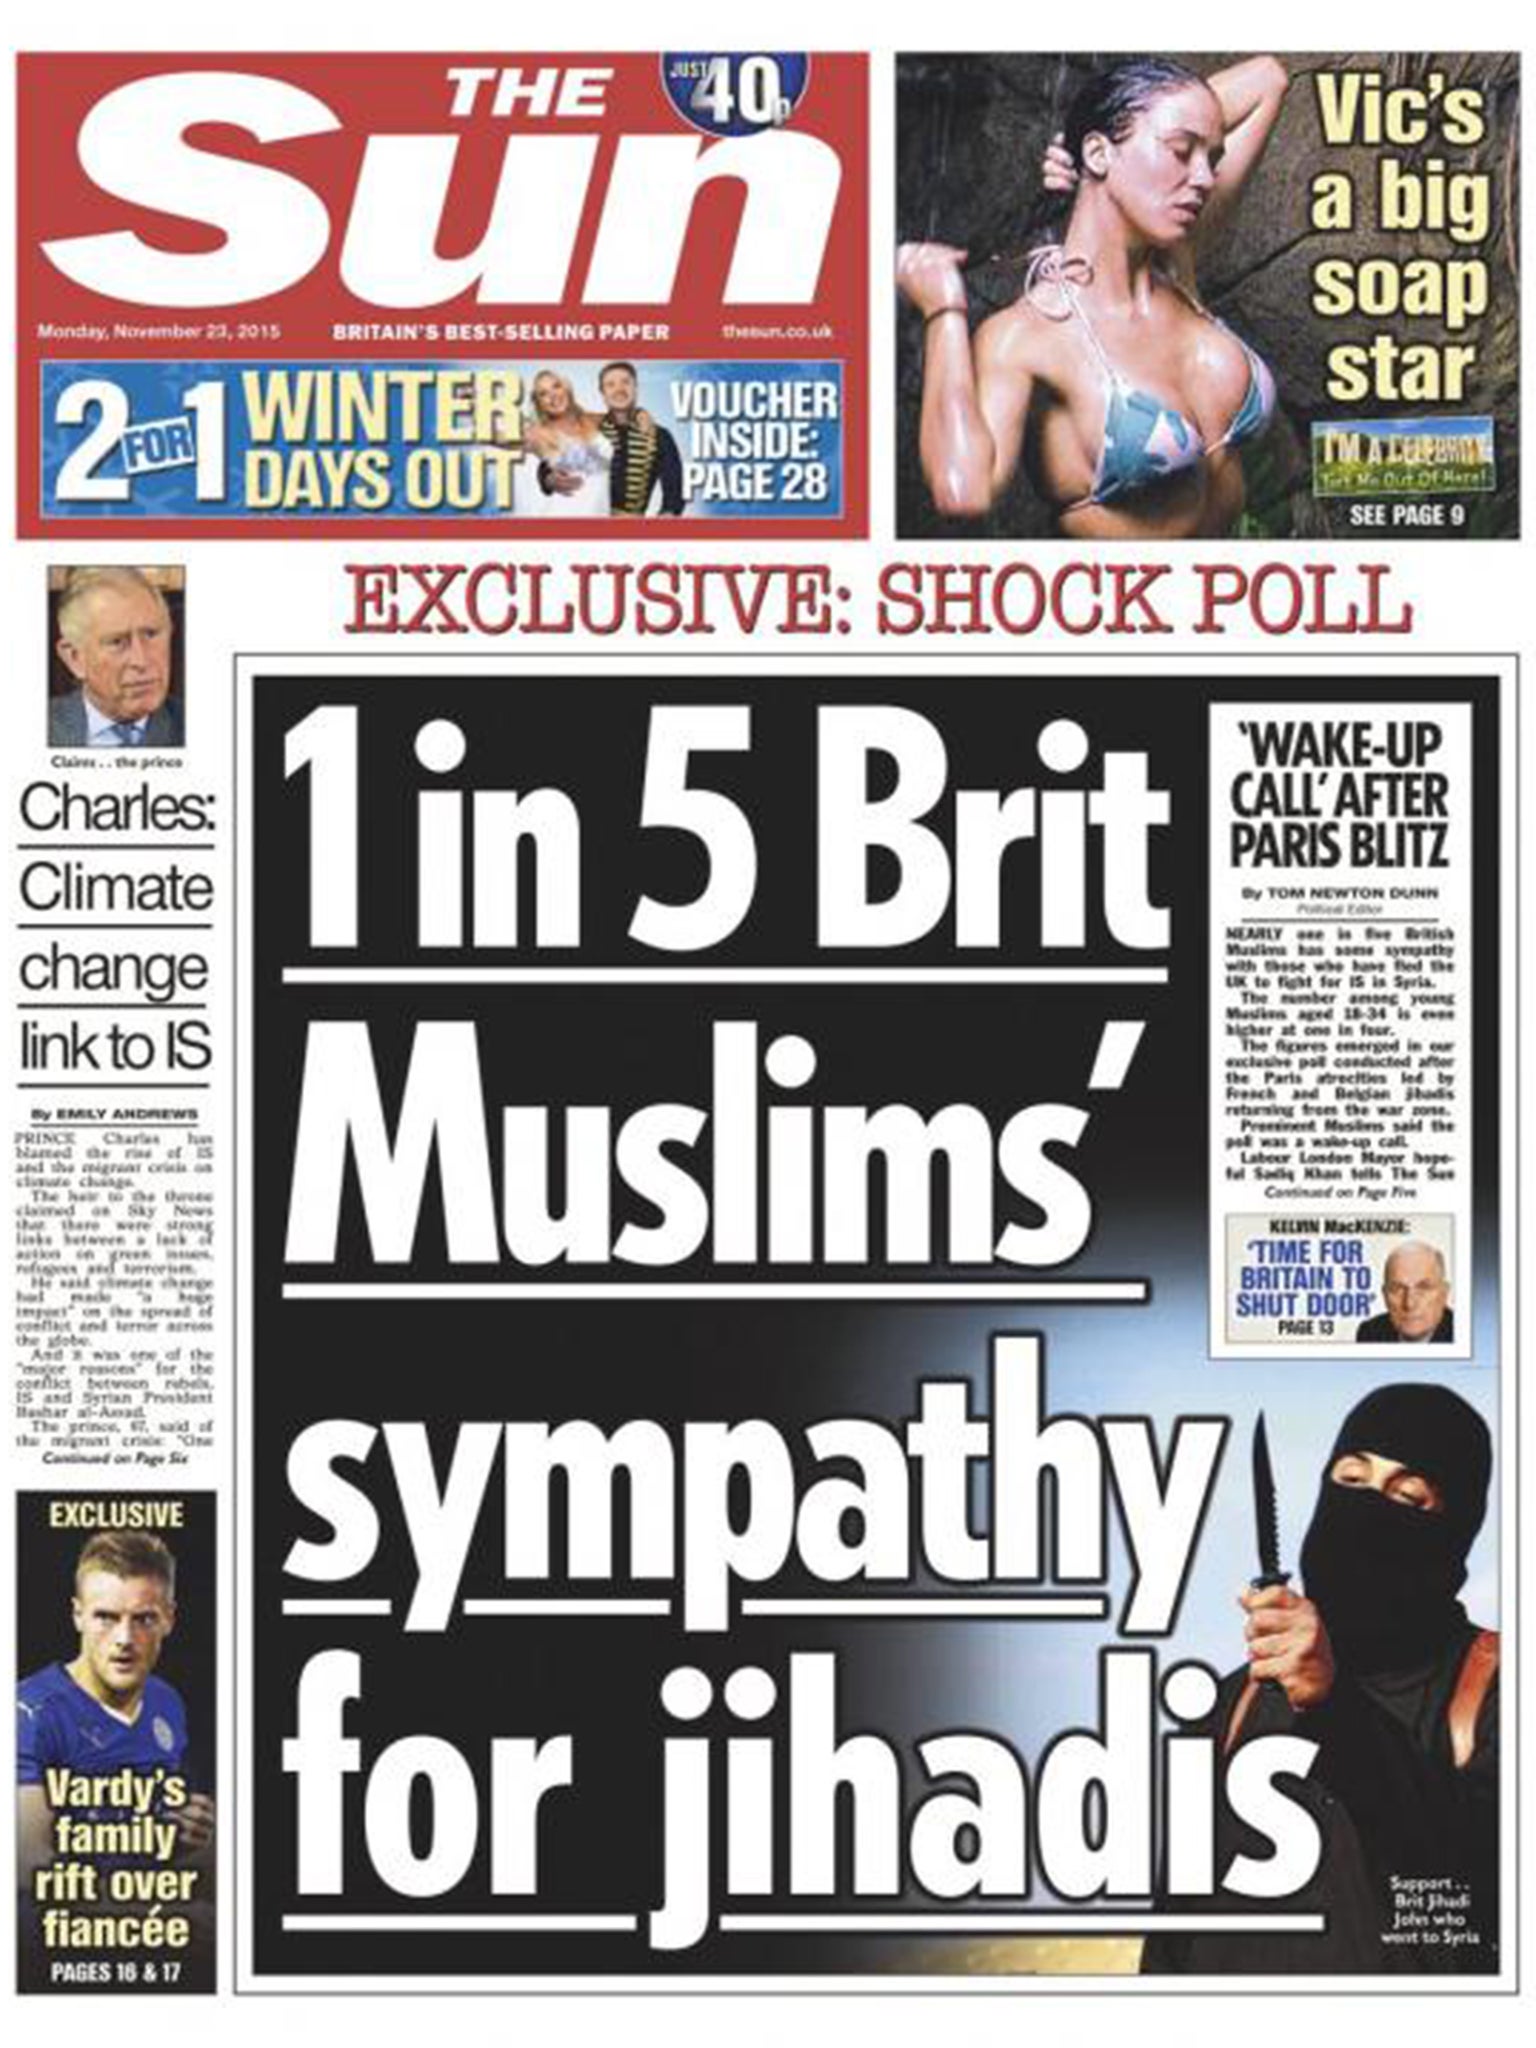 The Sun's controversial front page